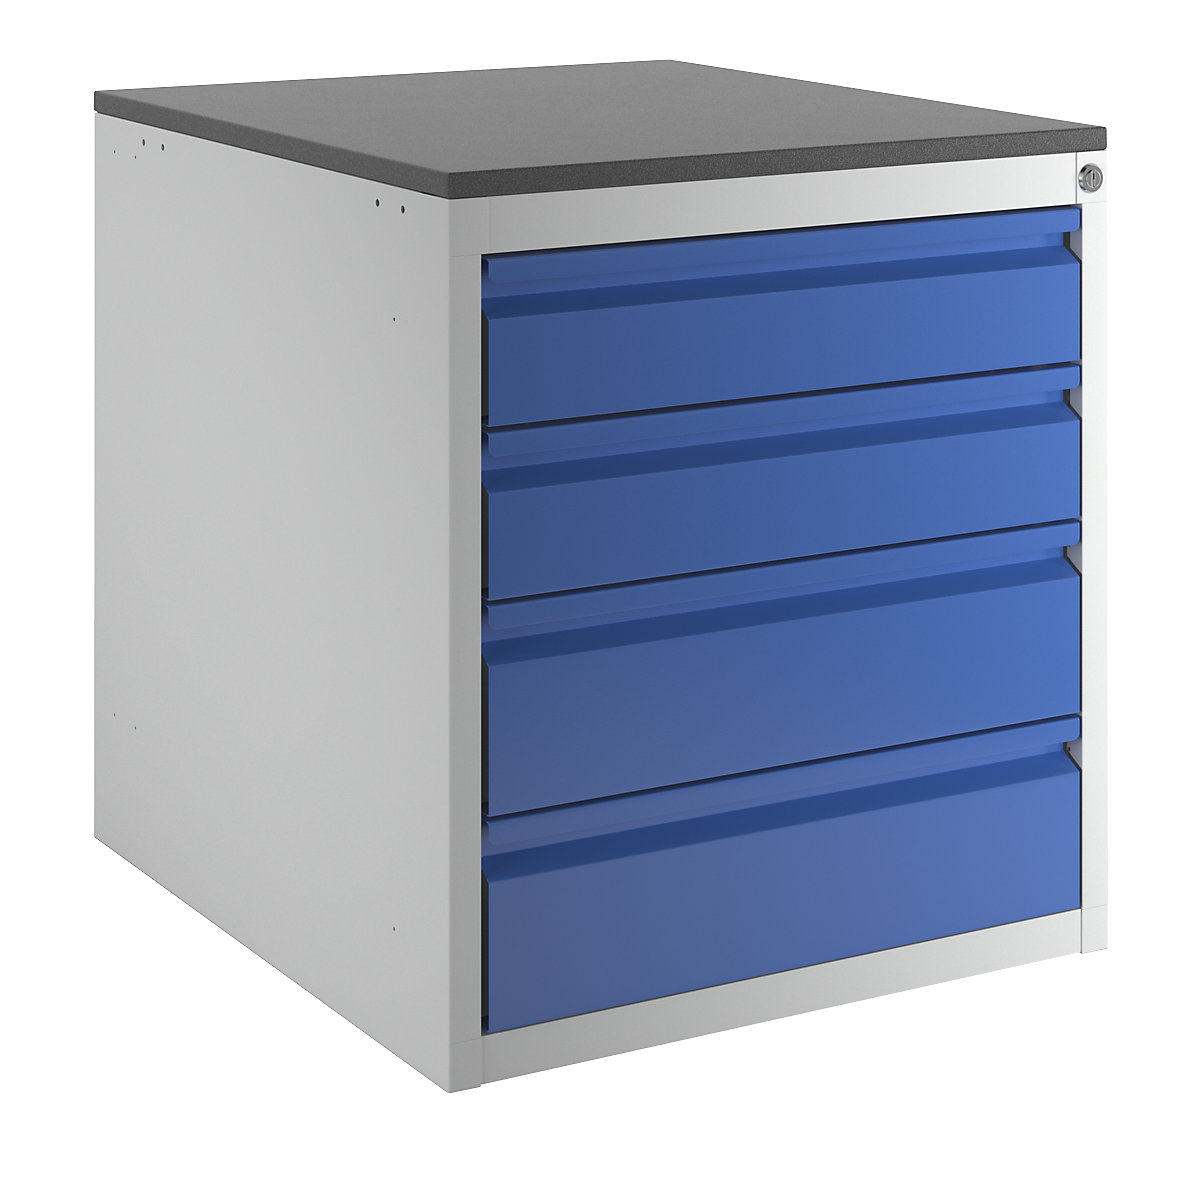 Drawer cupboard with telescopic guides – RAU, height 640 mm, drawers: 2 x 120, 2 x 150 mm, light grey / gentian blue, width 580 mm-8